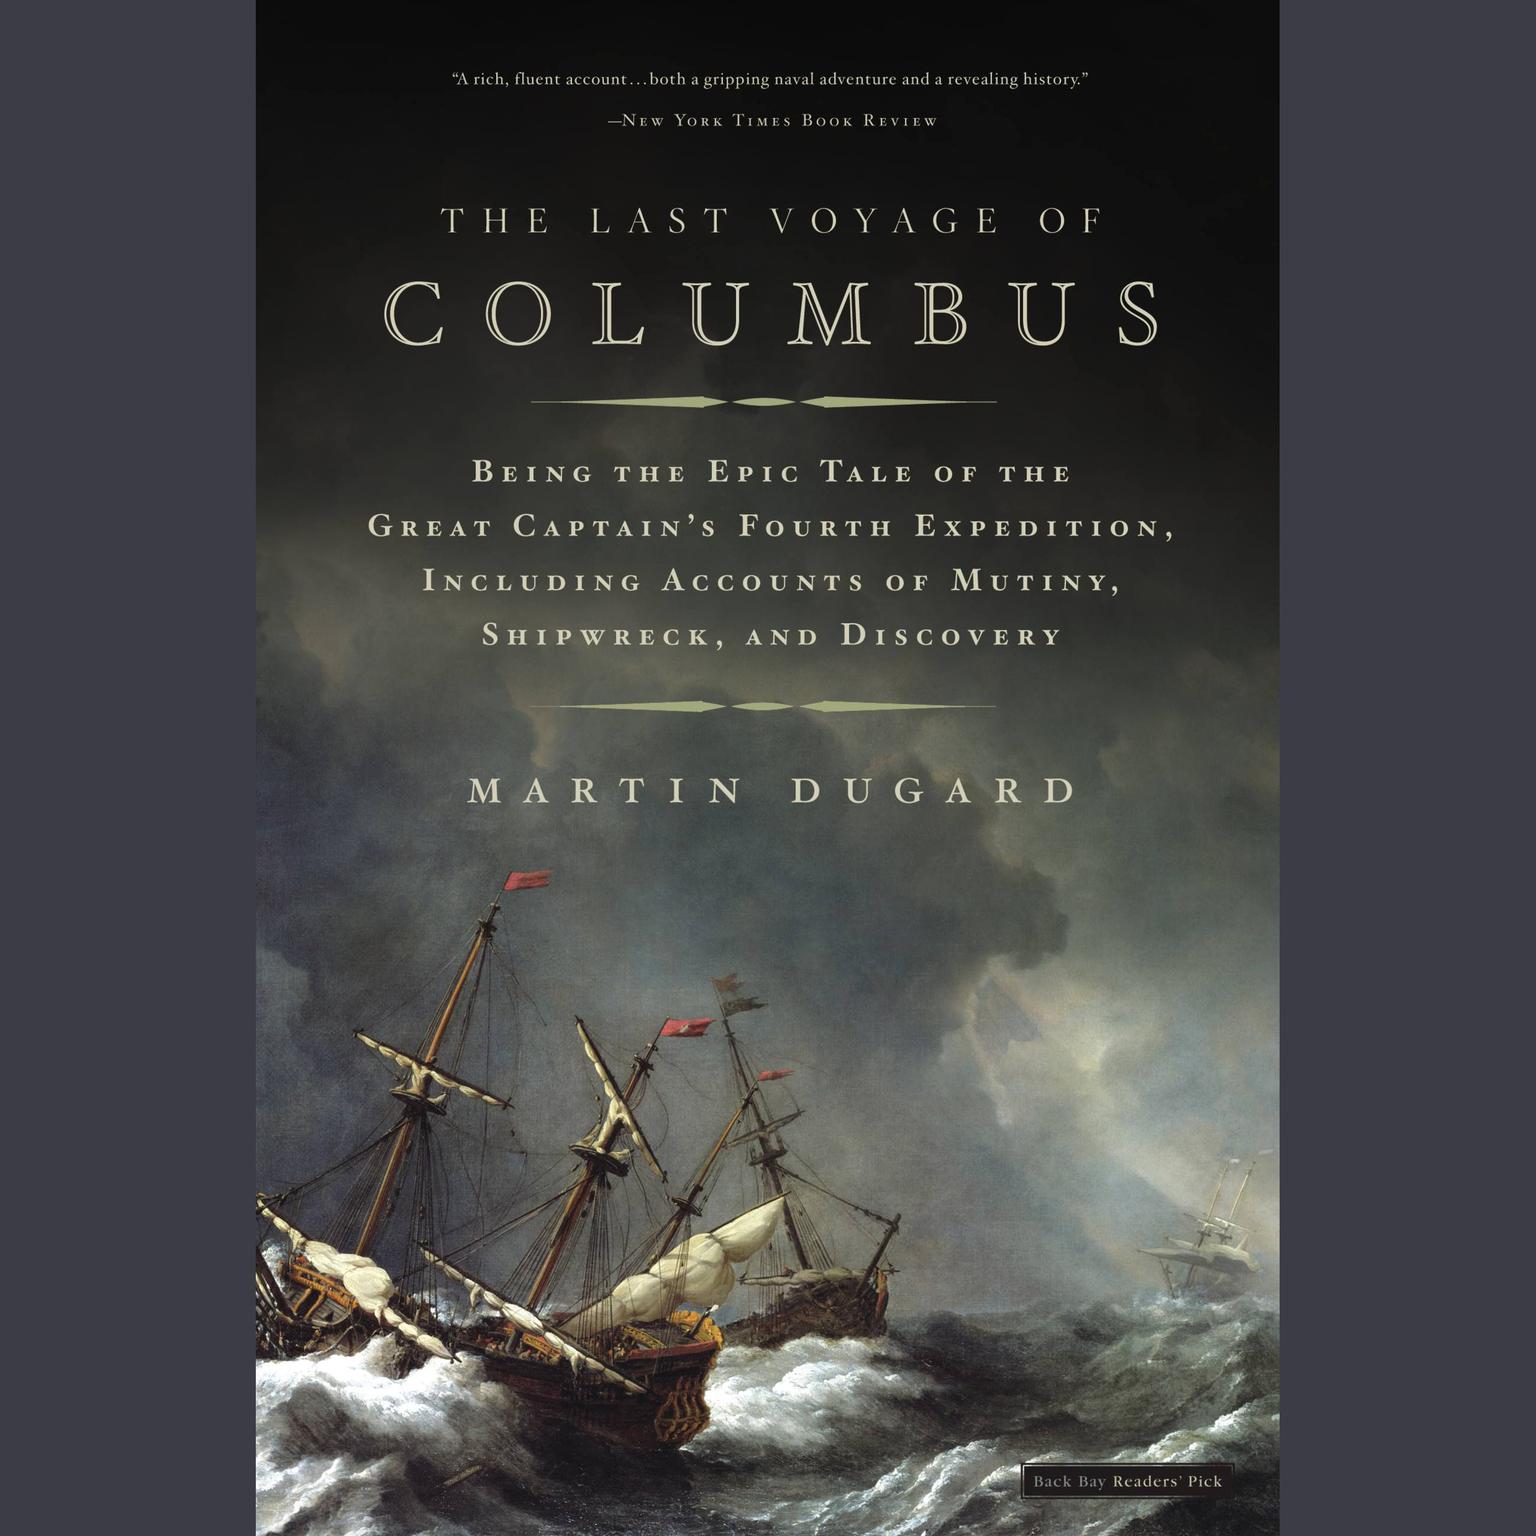 The Last Voyage of Columbus (Abridged): Being the Epic Tale of the Great Captains Fourth Expedition Including Accounts of Swordfight, Mutiny, Shipwreck, Gold, War, Hurrican, and Discovery Audiobook, by Martin Dugard